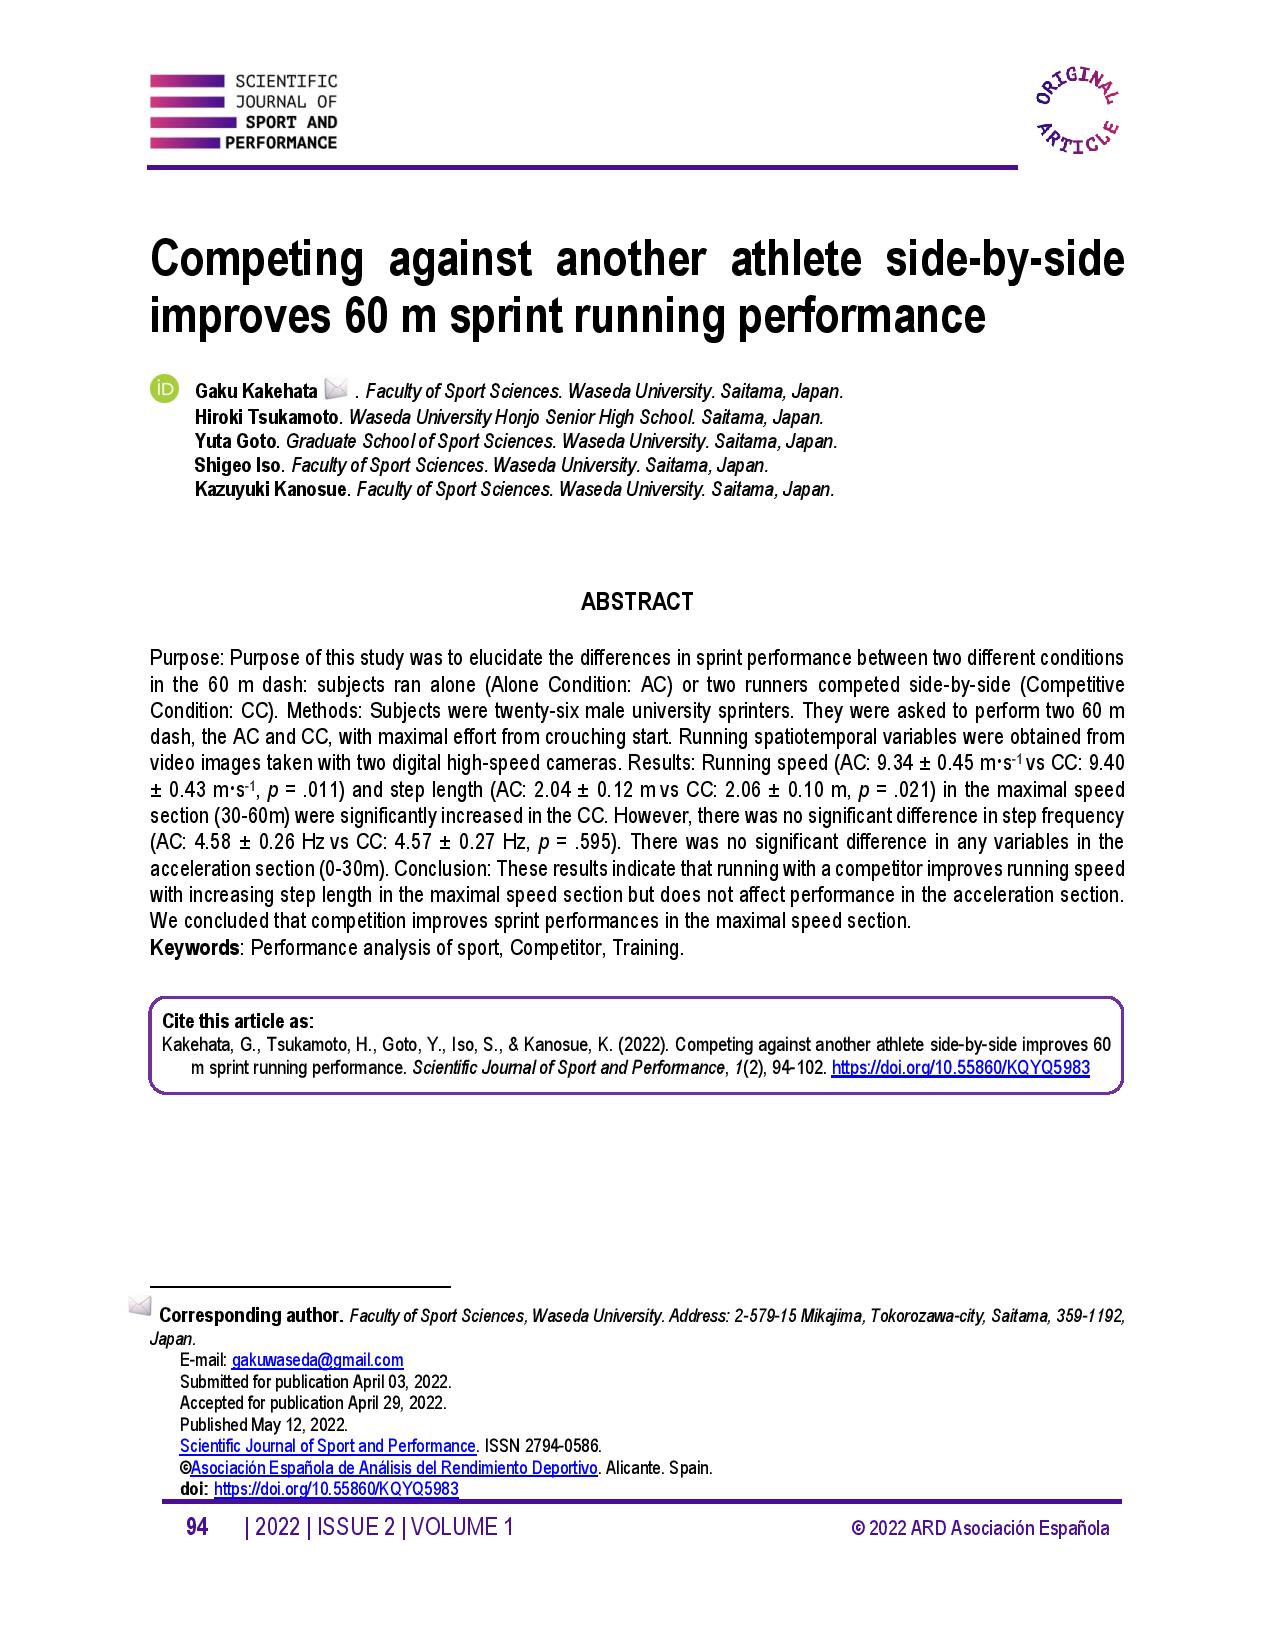 Competing against another athlete side-by-side improves 60 m sprint running performance